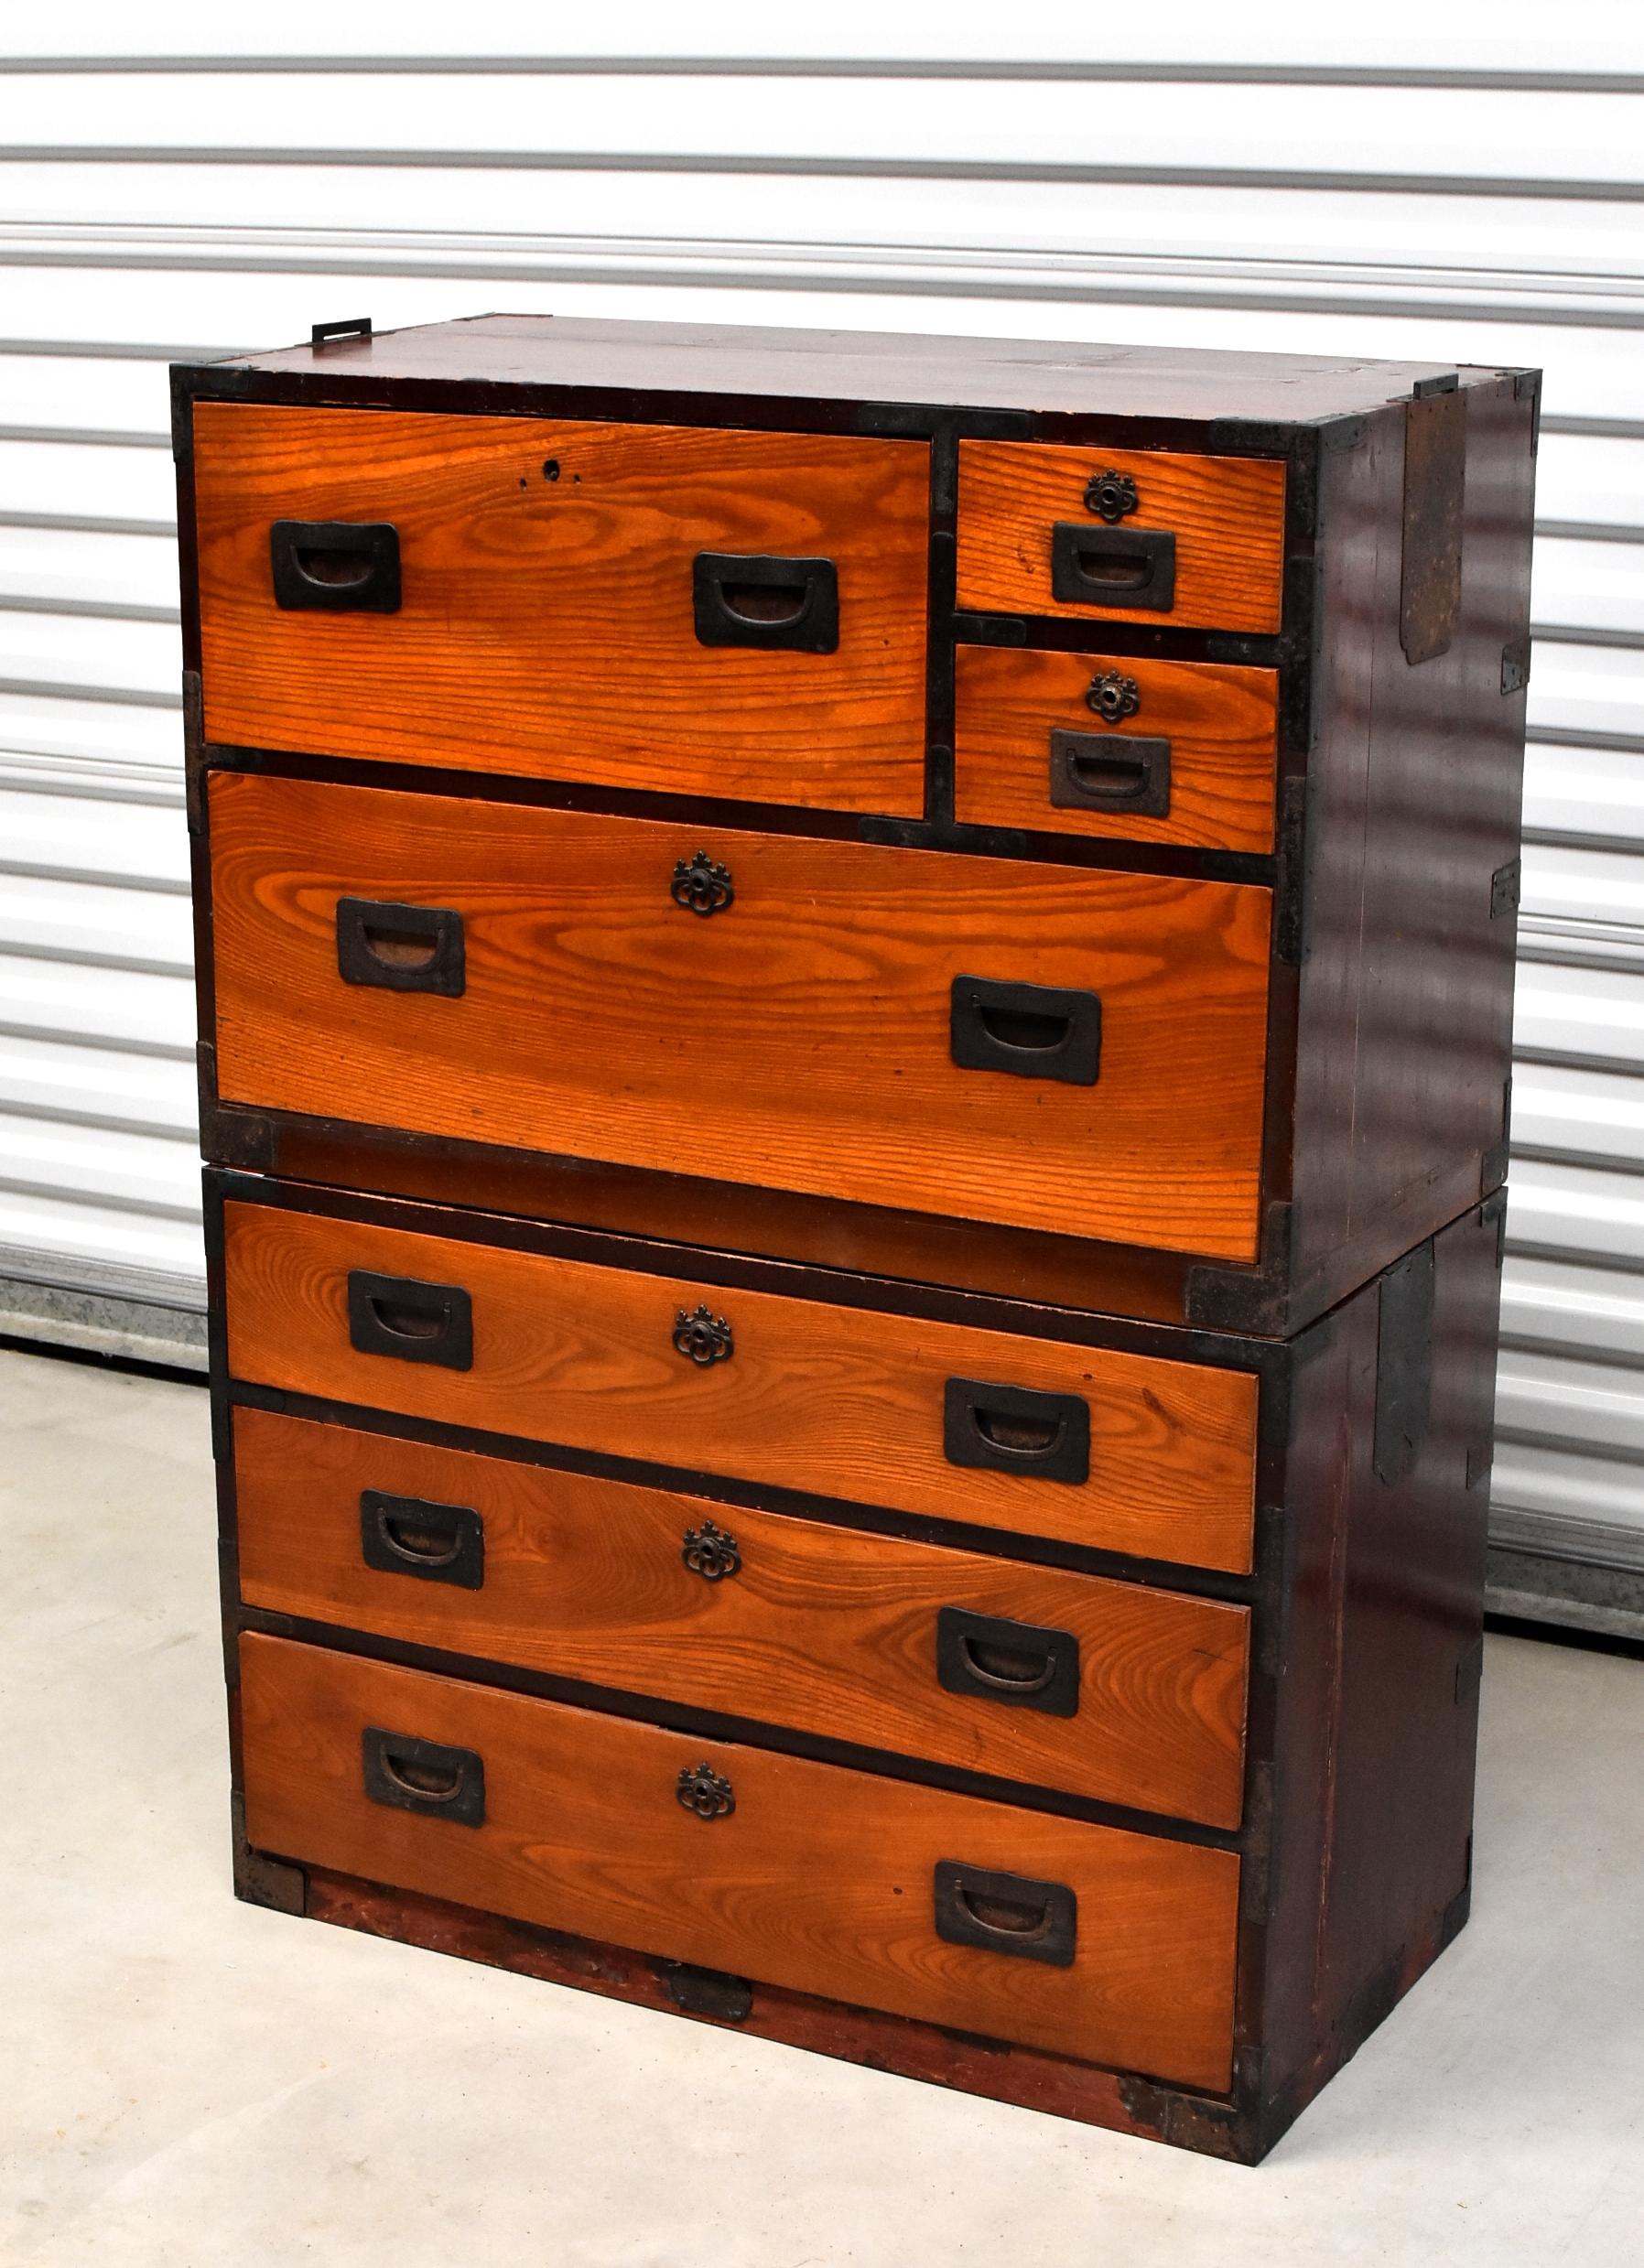 A beautiful vintage Japanese Tansu consists two individual chests that can be used separately. Beautiful, solid bronze and iron hardware. Fantastic contrast of orange and black creates great visual impact. Retractable side handles. 7 full capacity